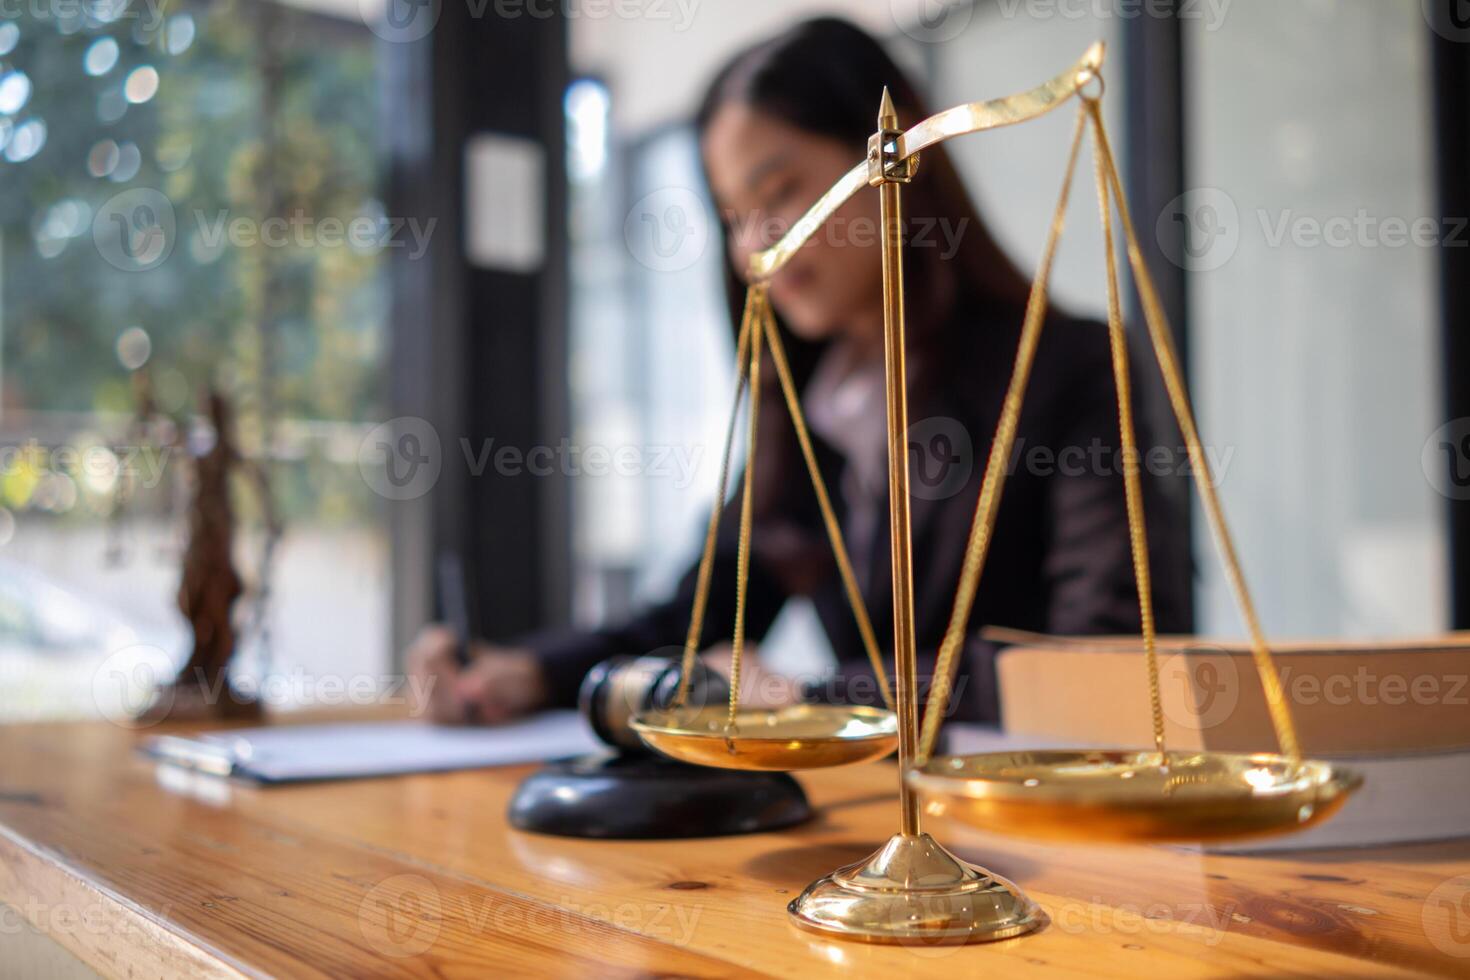 Brass scales are placed on lawyers desks in legal advice offices as a symbol of fairness and integrity in the High Court decision making. Brass scales were used as a symbol of honesty and justice. photo